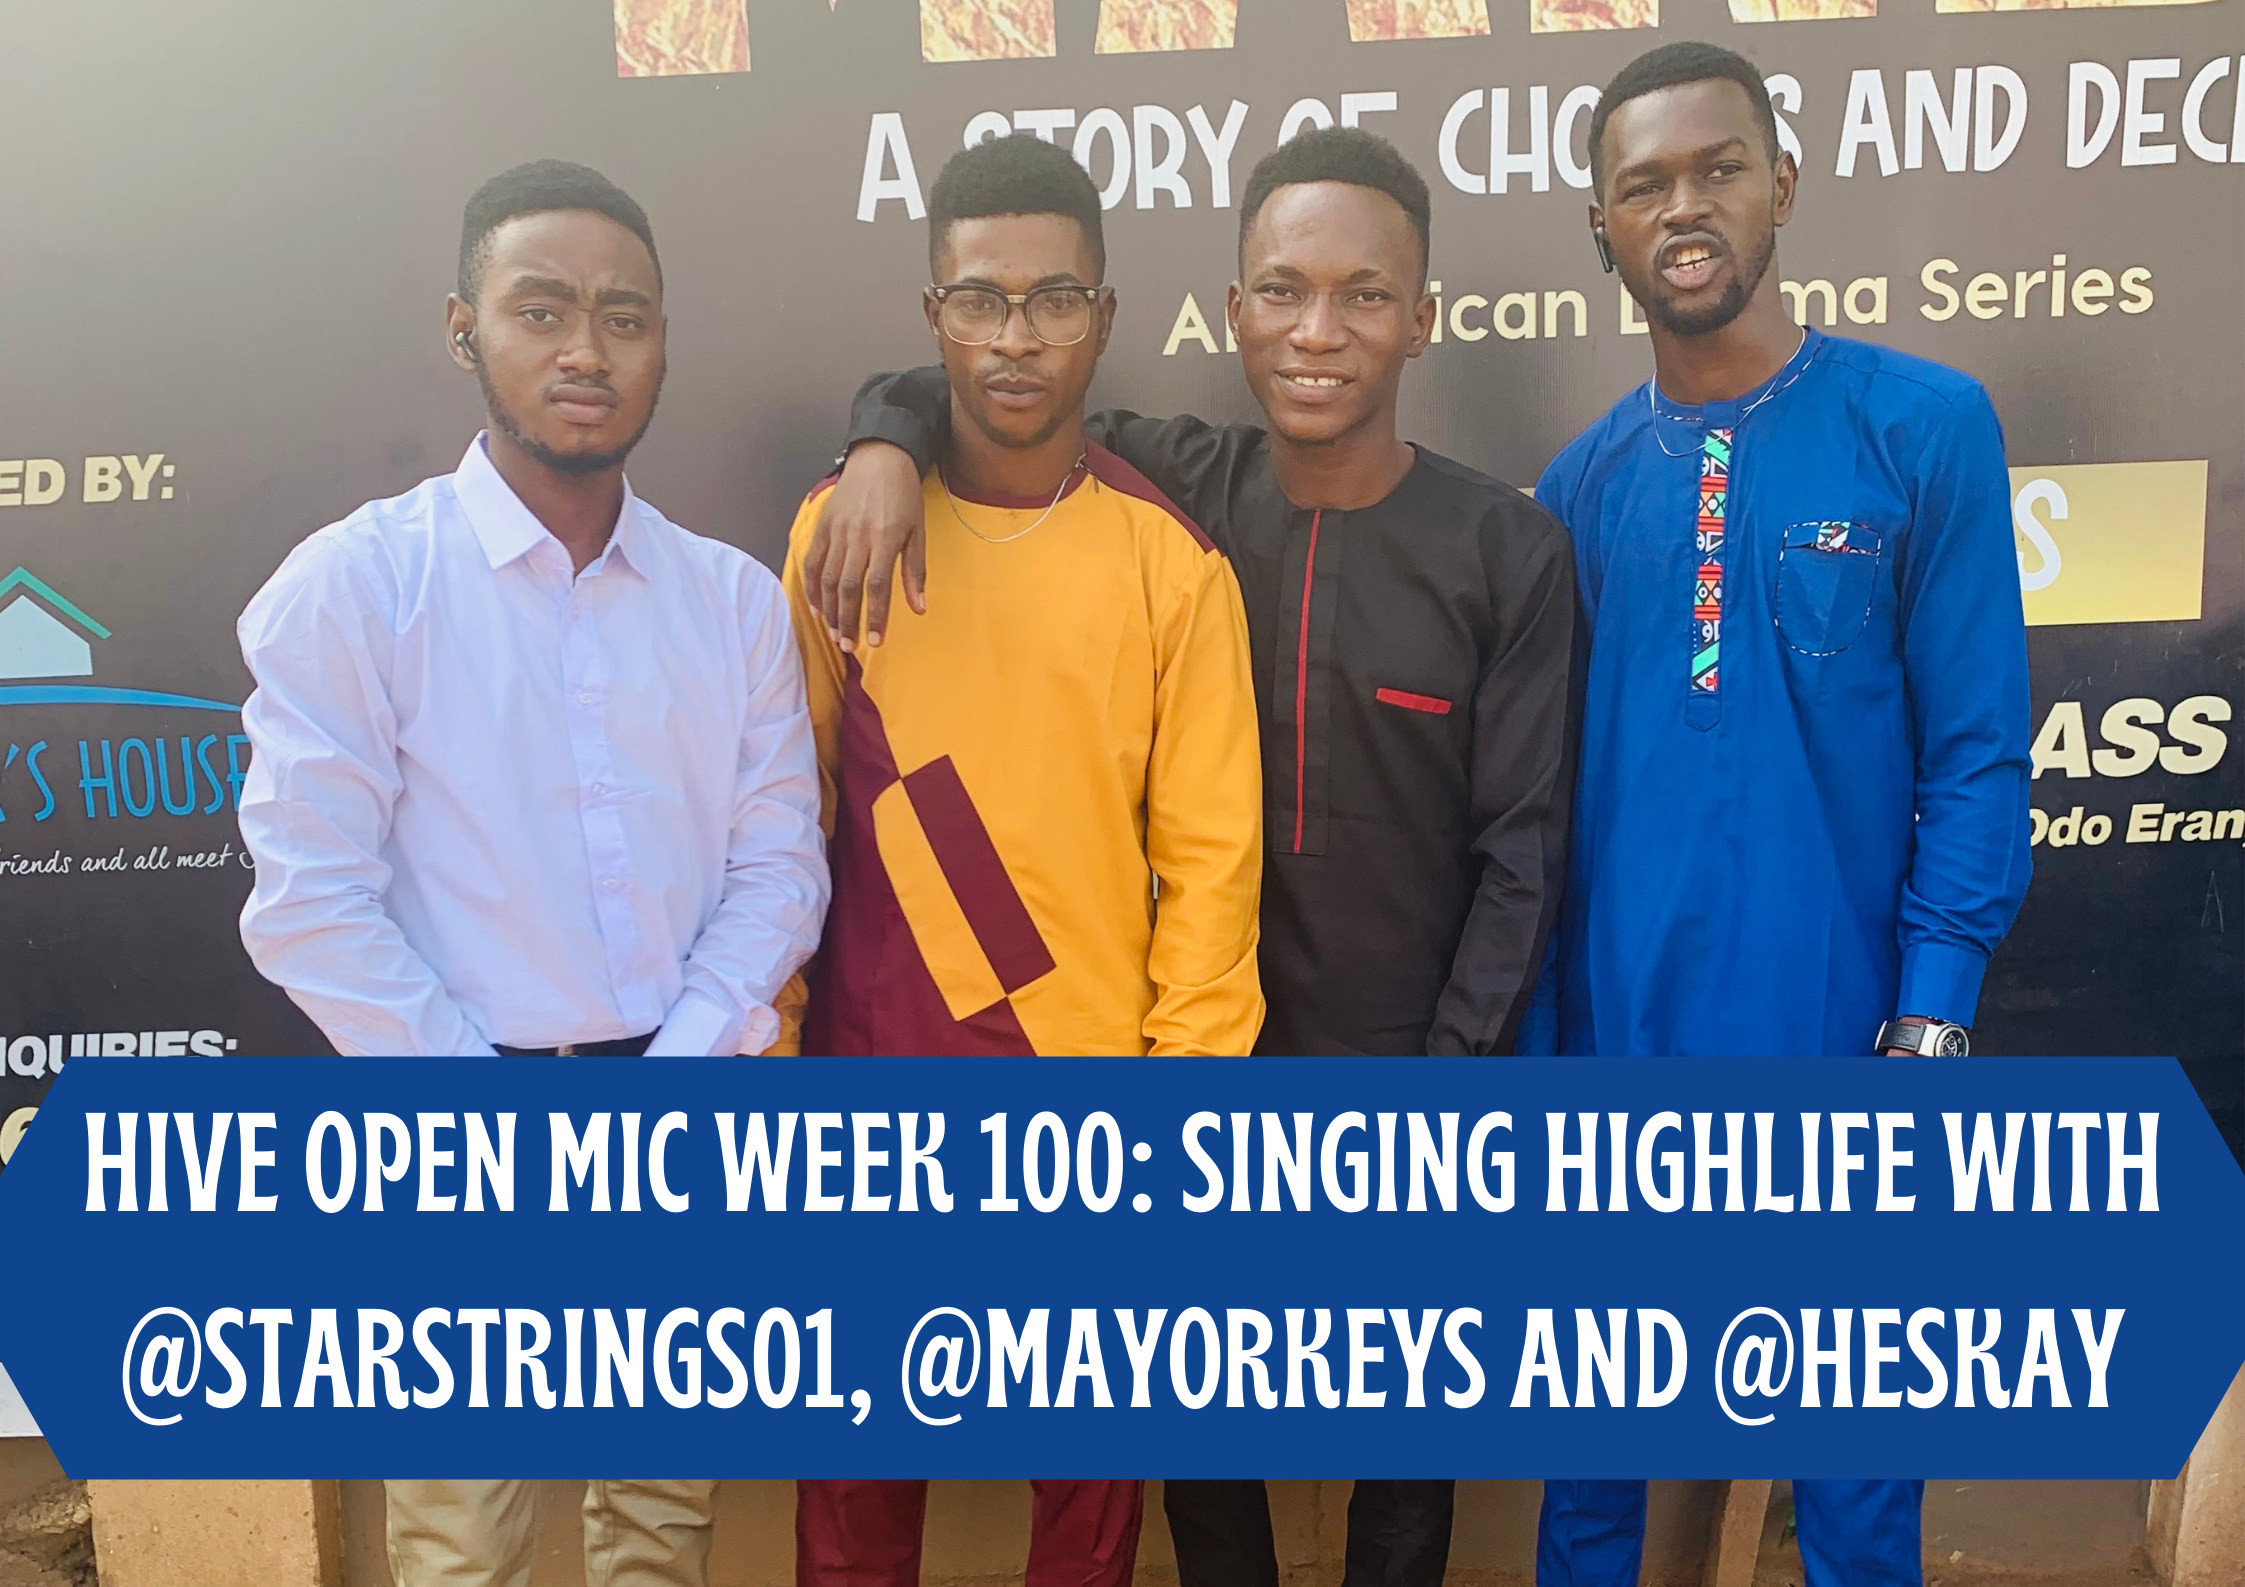 HIVE OPEN MIC WEEK 100 SINGING HIGHLIFE WITH @STARSTRINGS01, @MAYORKEYS AND @HESKAY.png